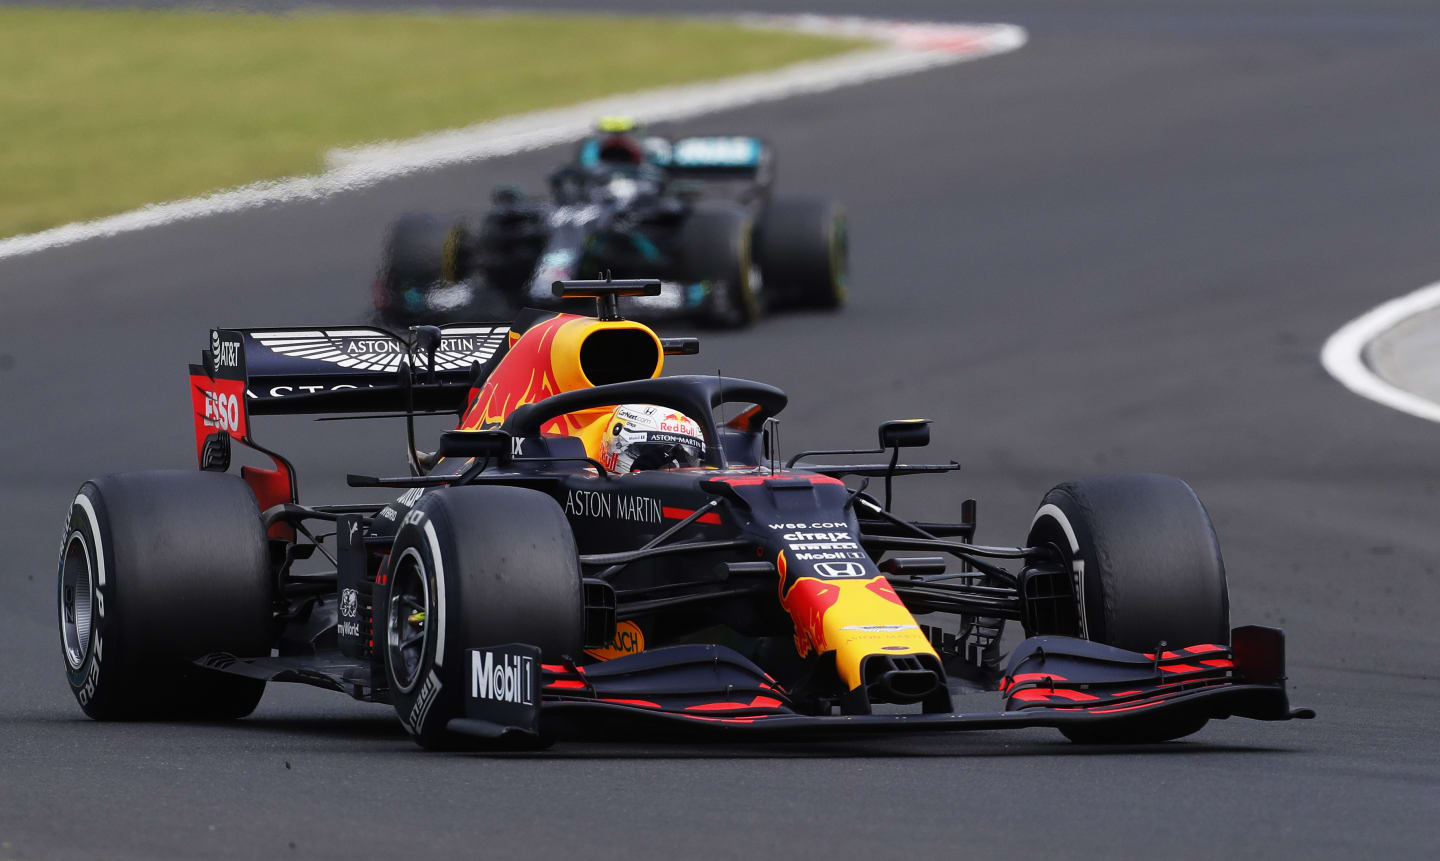 BUDAPEST, HUNGARY - JULY 19: Max Verstappen of the Netherlands driving the (33) Aston Martin Red